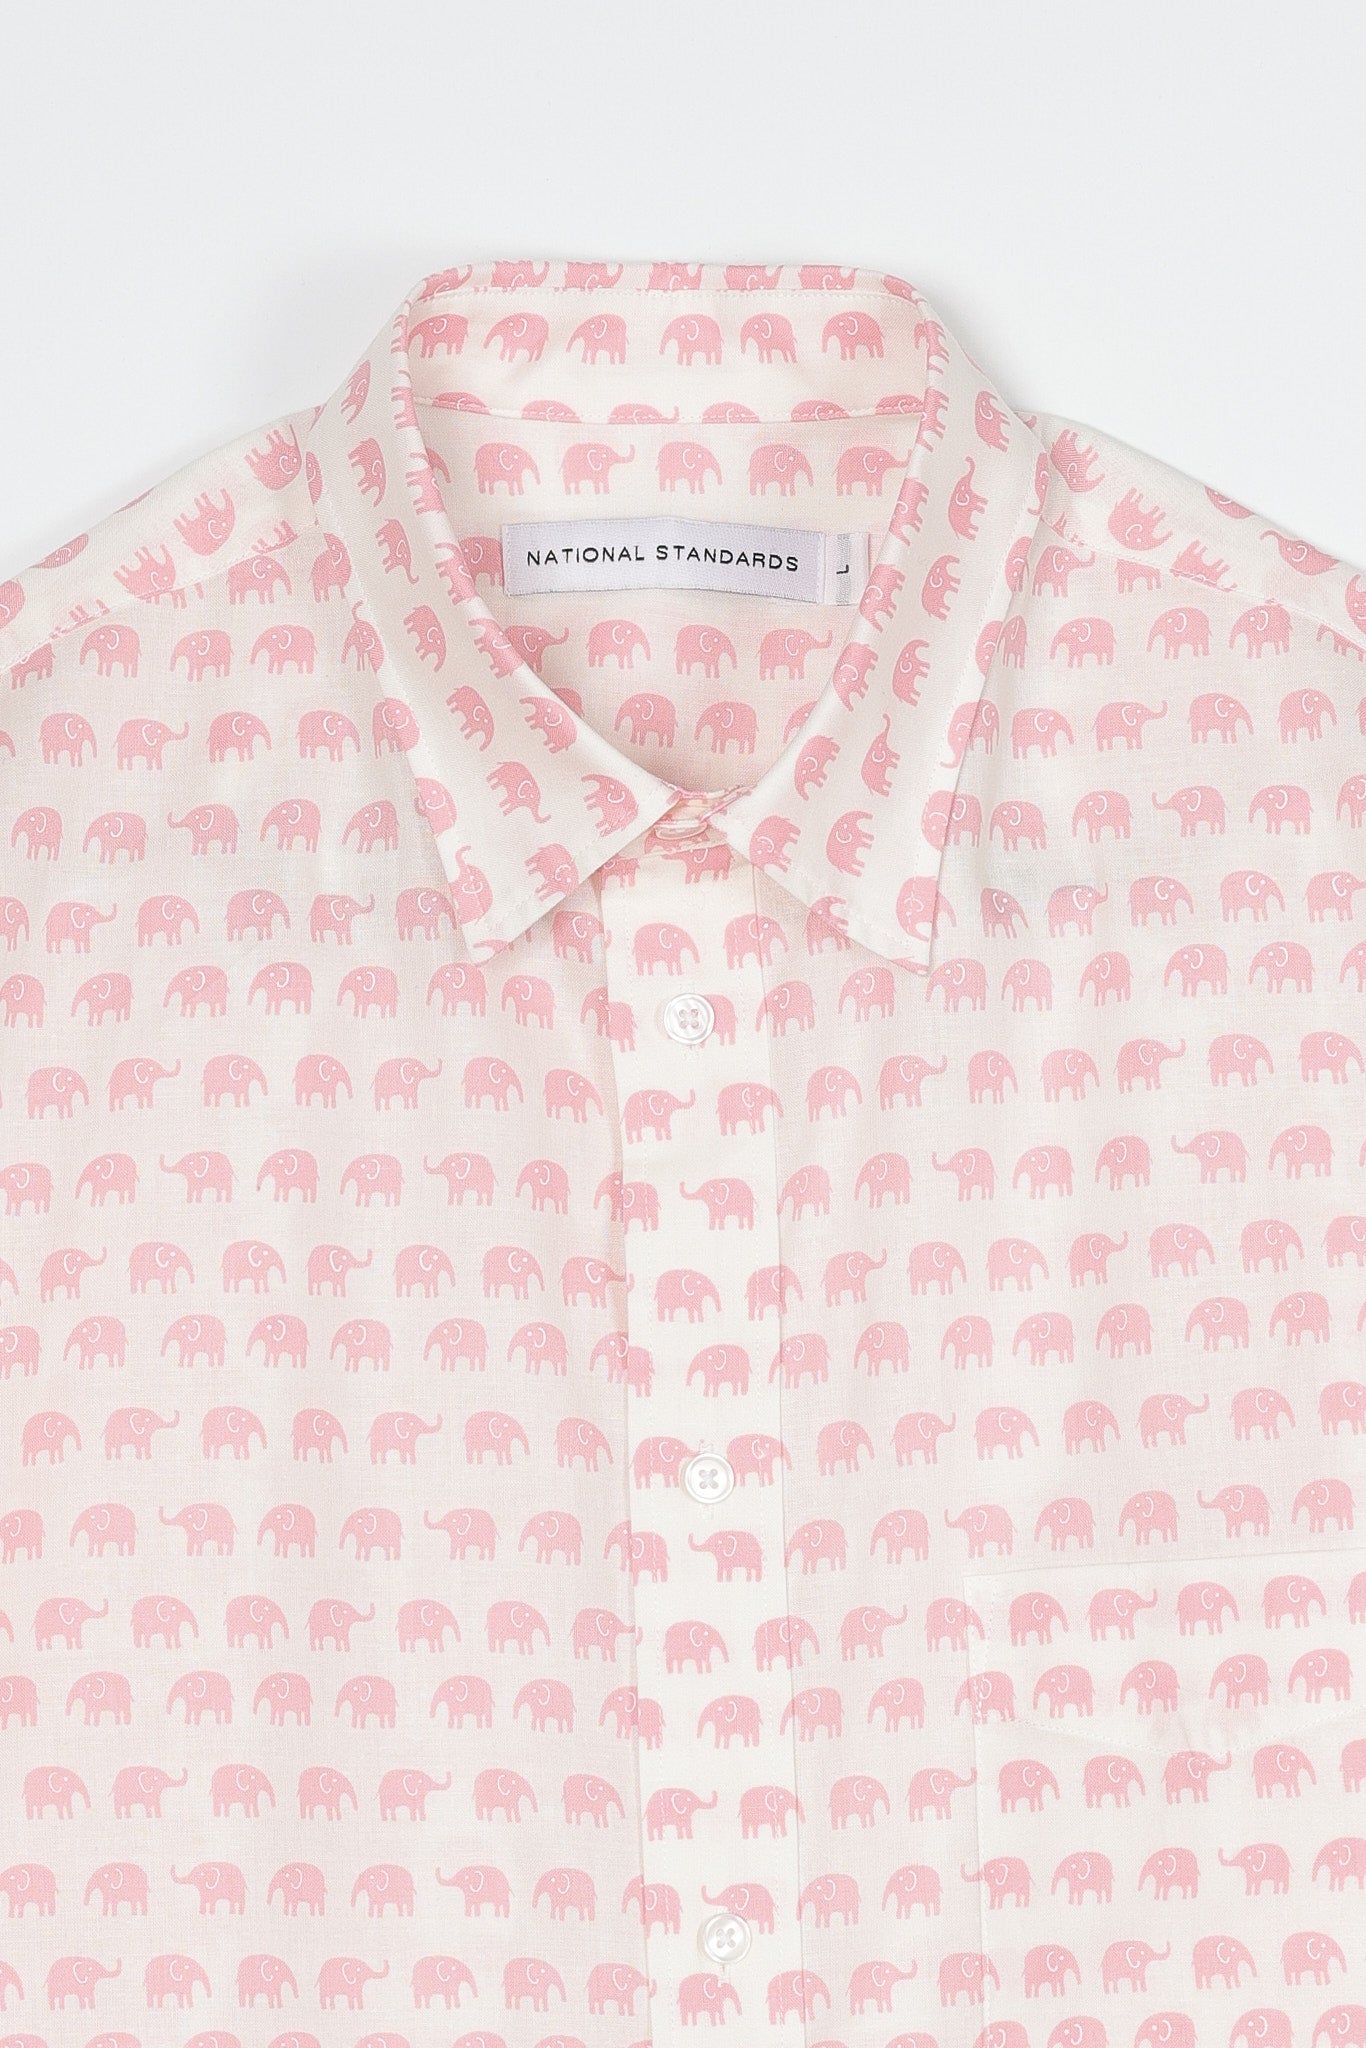 Japanese Pink Elephant Print in Pink 06